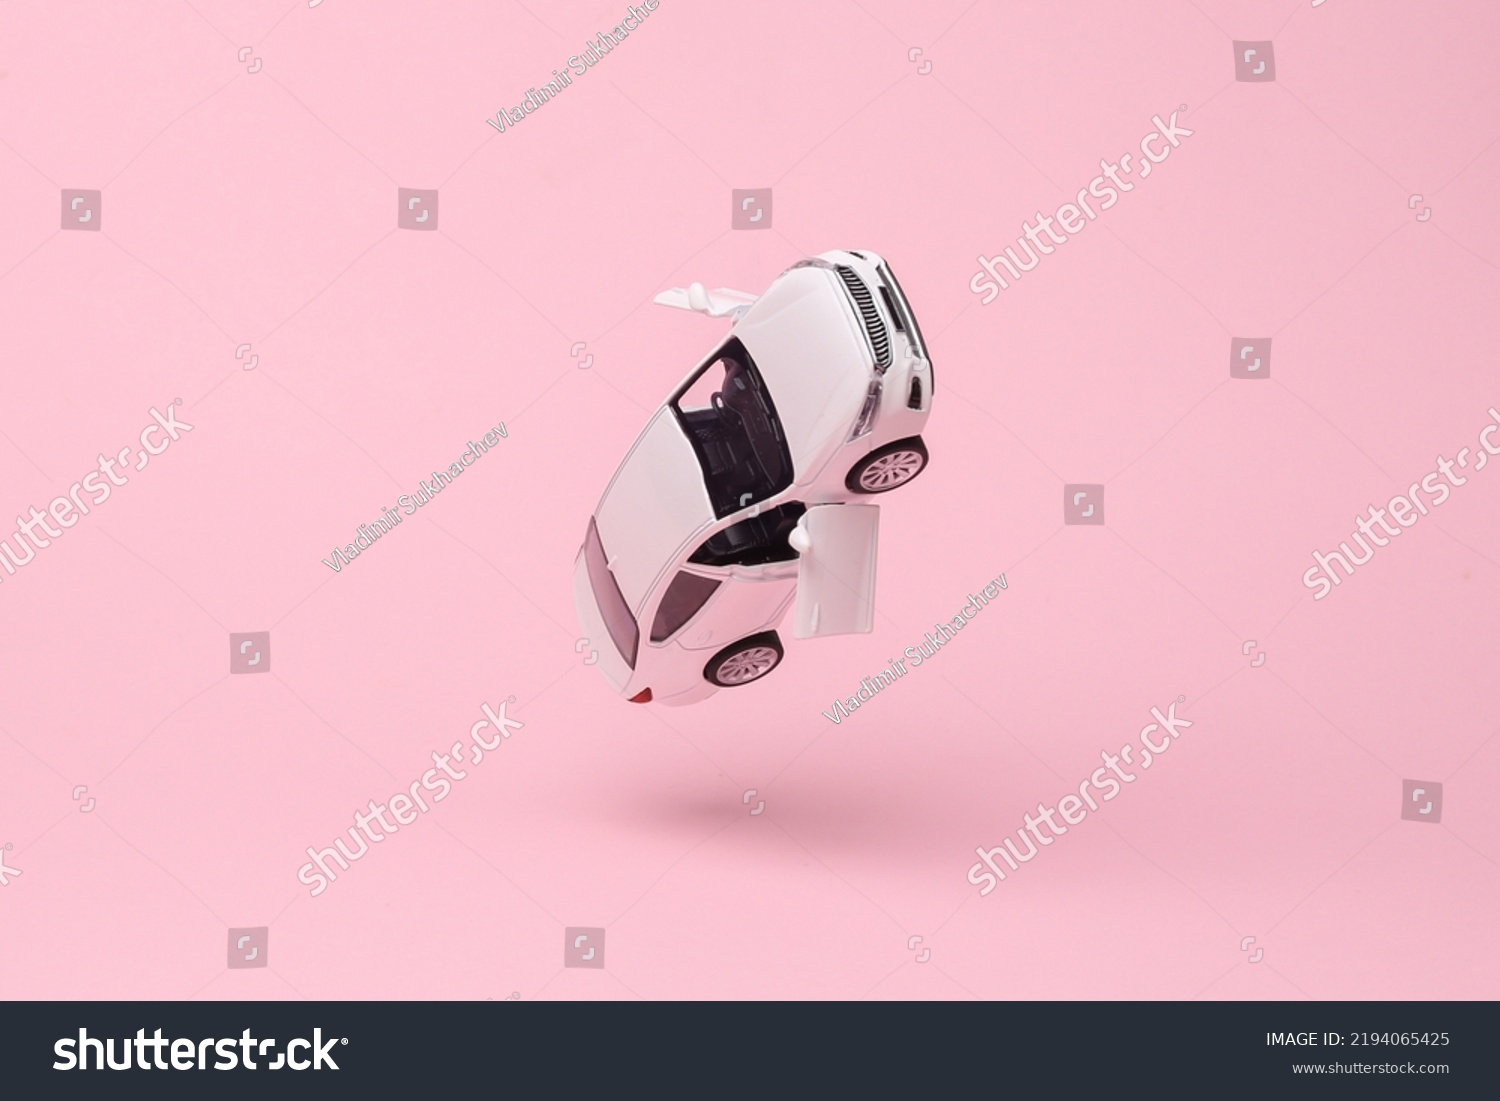 Miniature car model flying in antigravity on pink background with shadow. Levitation object in the air. Creative minimal layout #2194065425